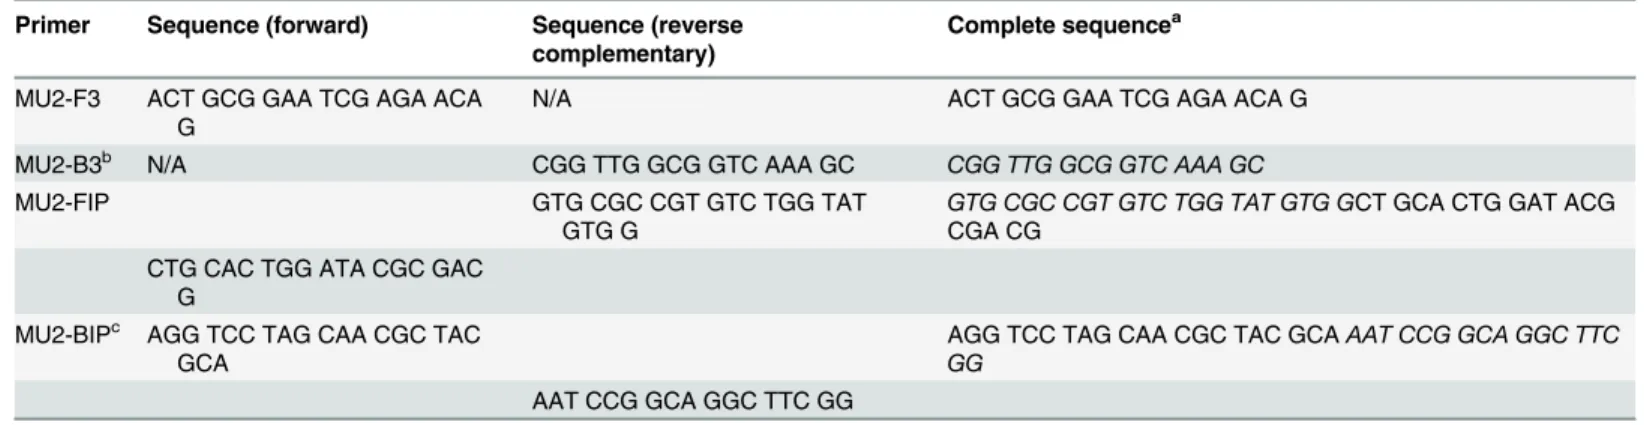 Table 1. Primer sequences of the IS 2404 LAMP assay.